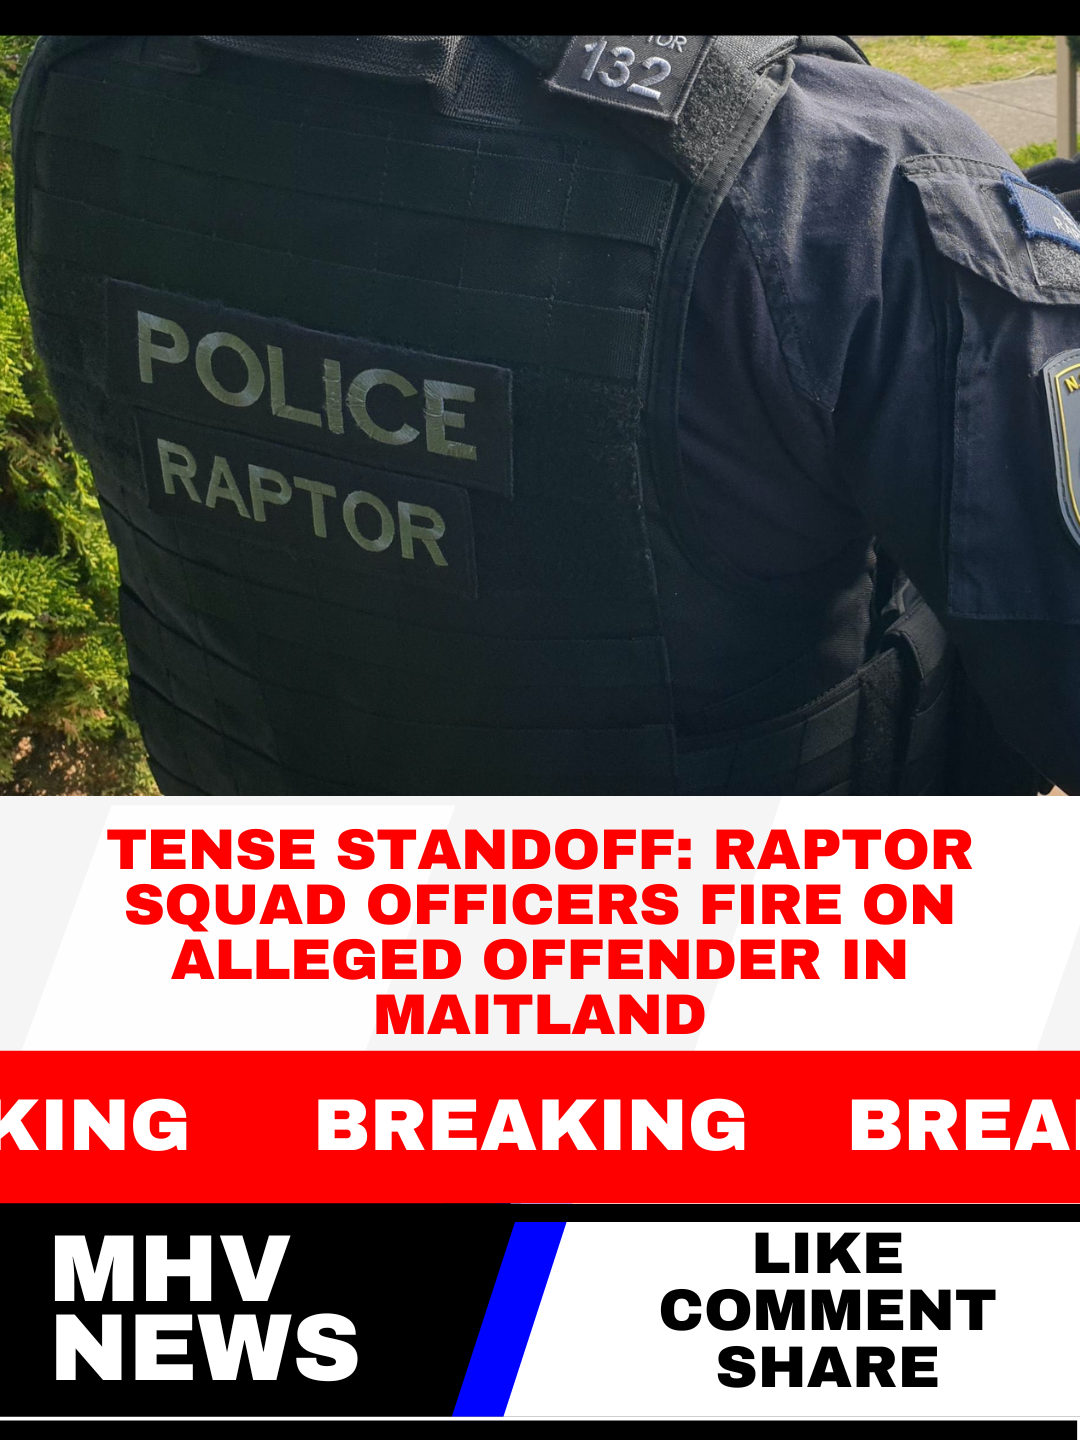 You are currently viewing Tense Standoff: Raptor Squad Officers Fire on Alleged Offender in Maitland